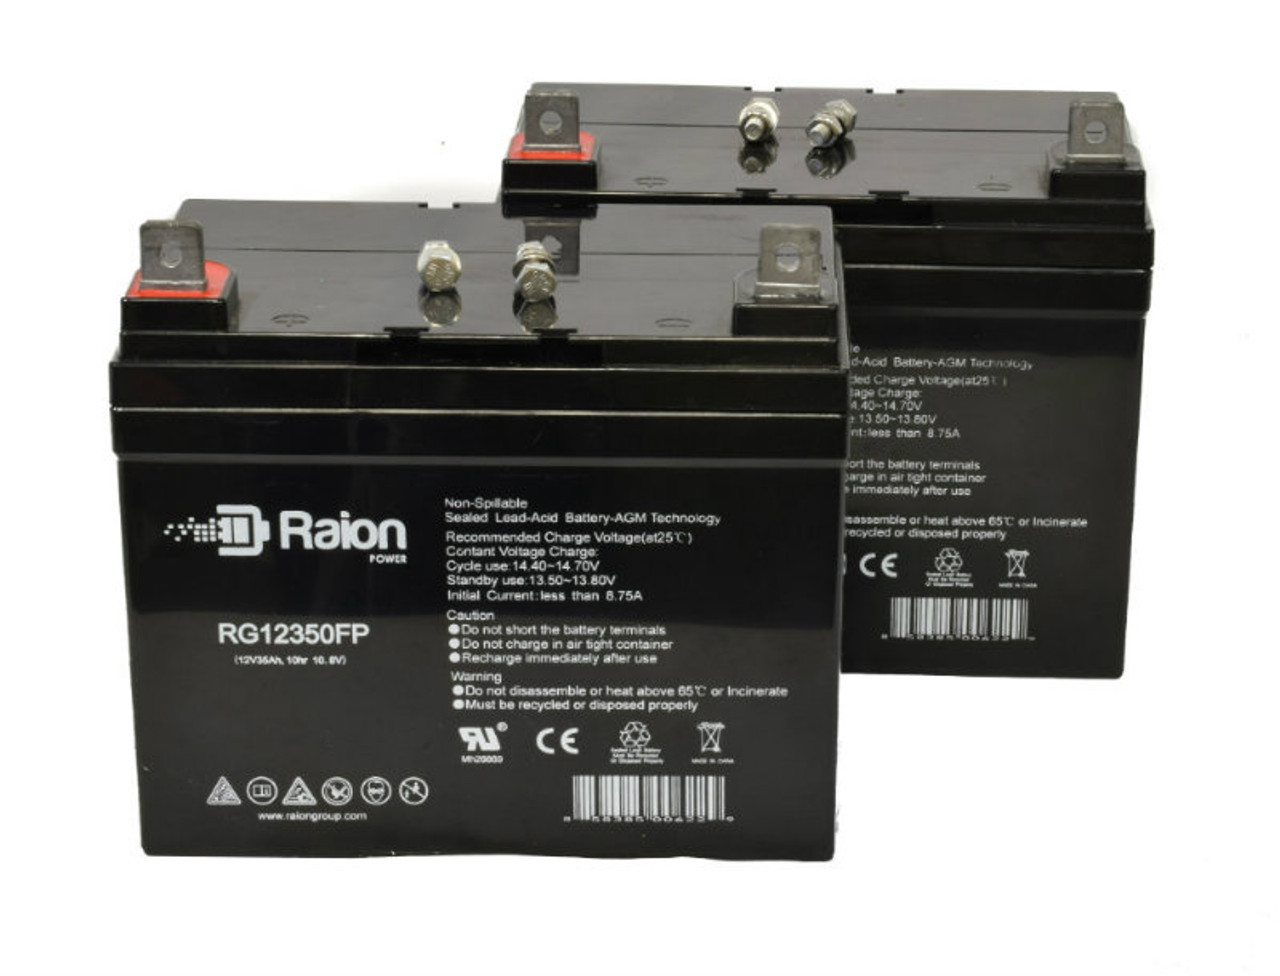 Raion Power Replacement 12V 35Ah Lawn Mower Battery for Clipper 2304 KA - 2 Pack